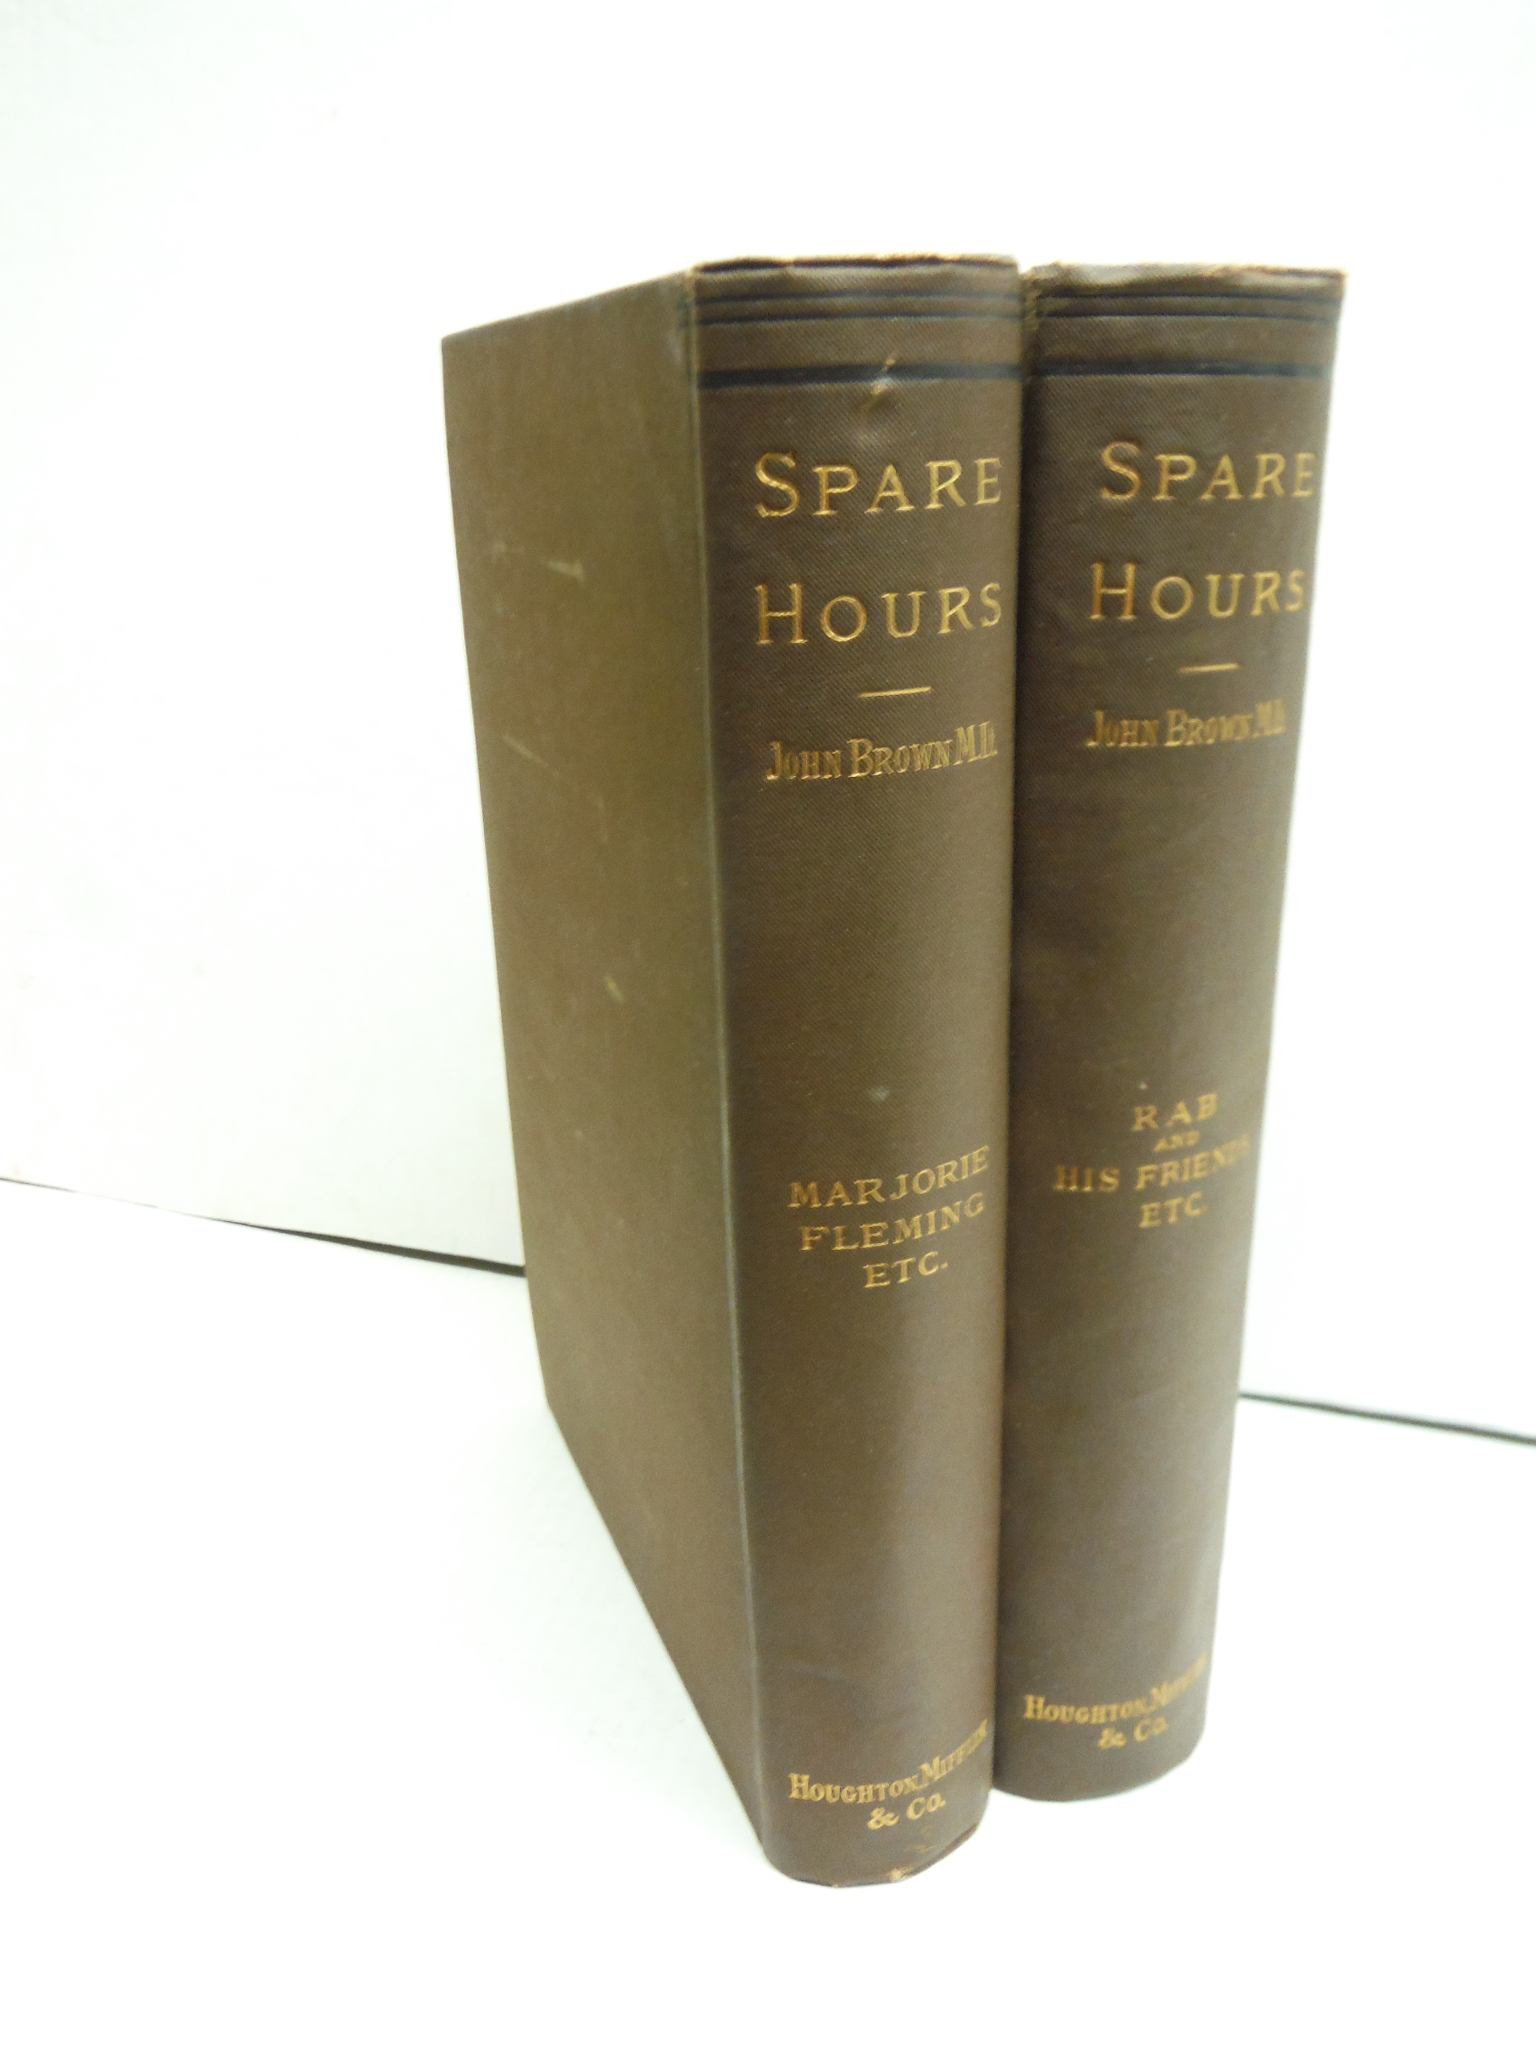 2 volume set: Spare Hours:  Rab and Marjorie Fleming.